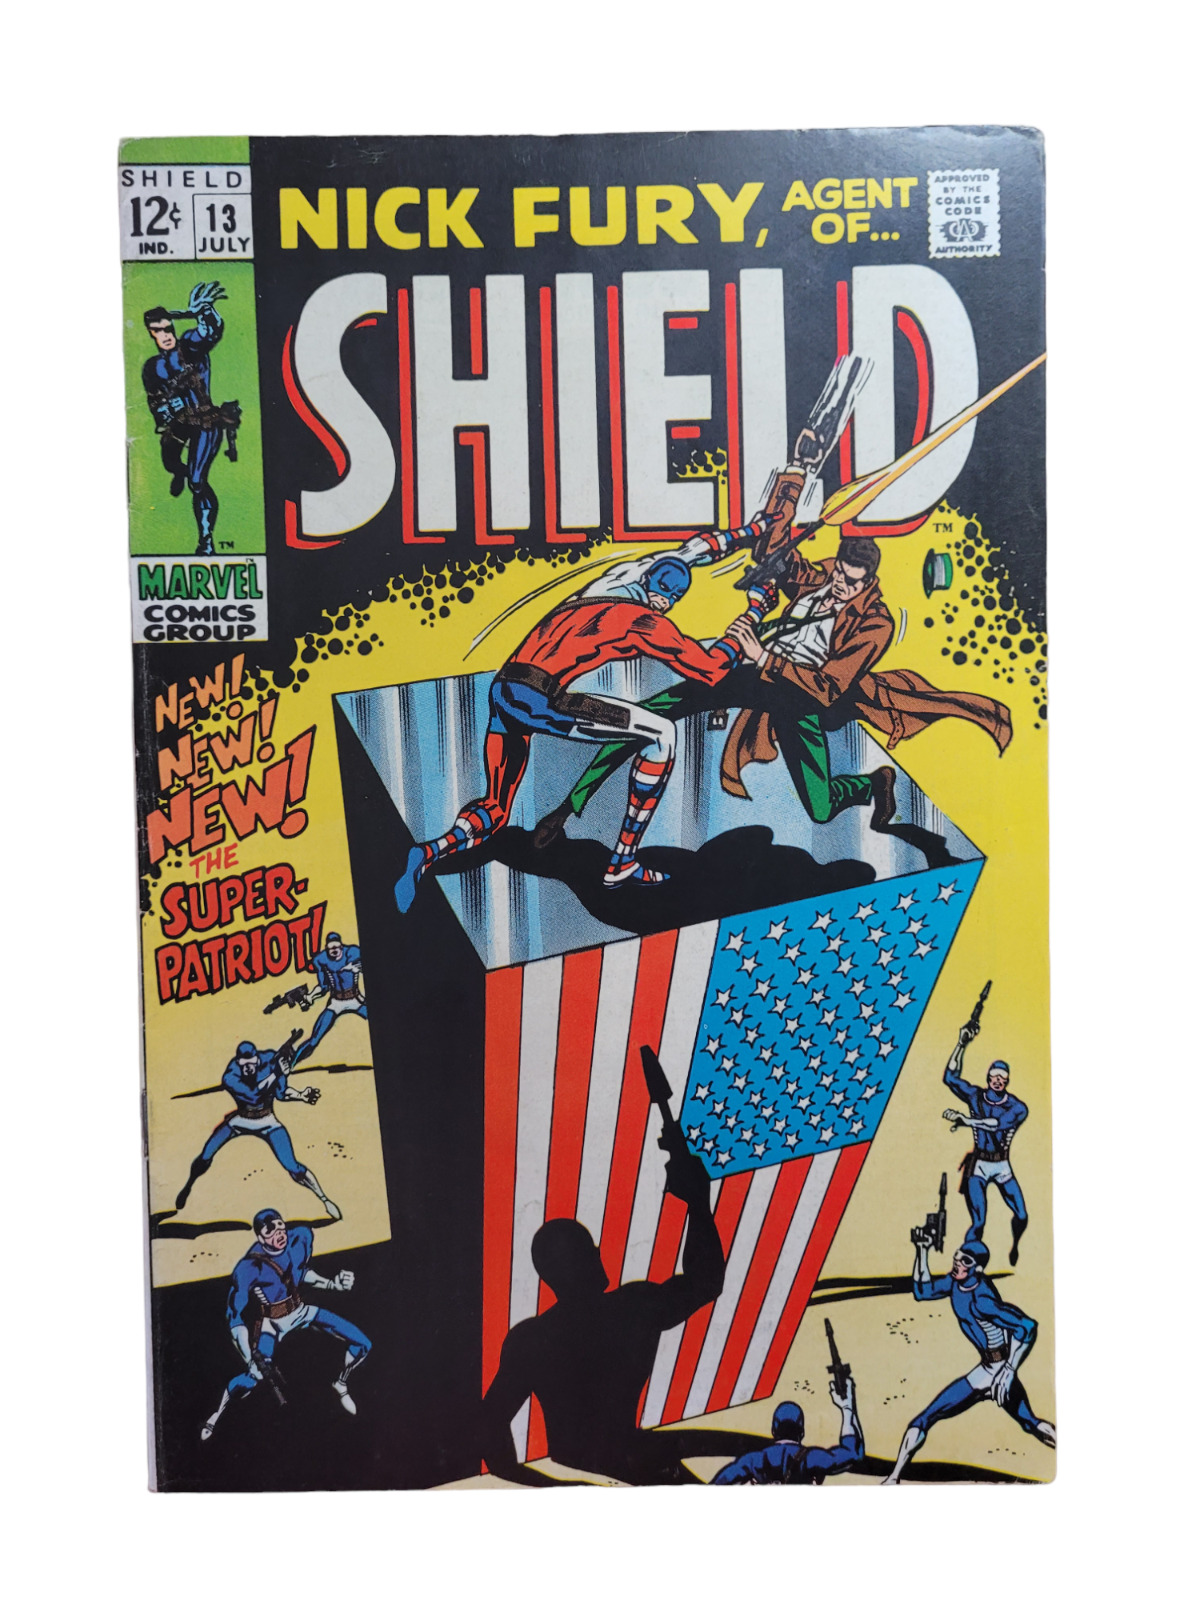 NICK FURY AGENT OF SHIELD #13 1st Super-Patriot 1969 Silver Age Marvel FN- RAW